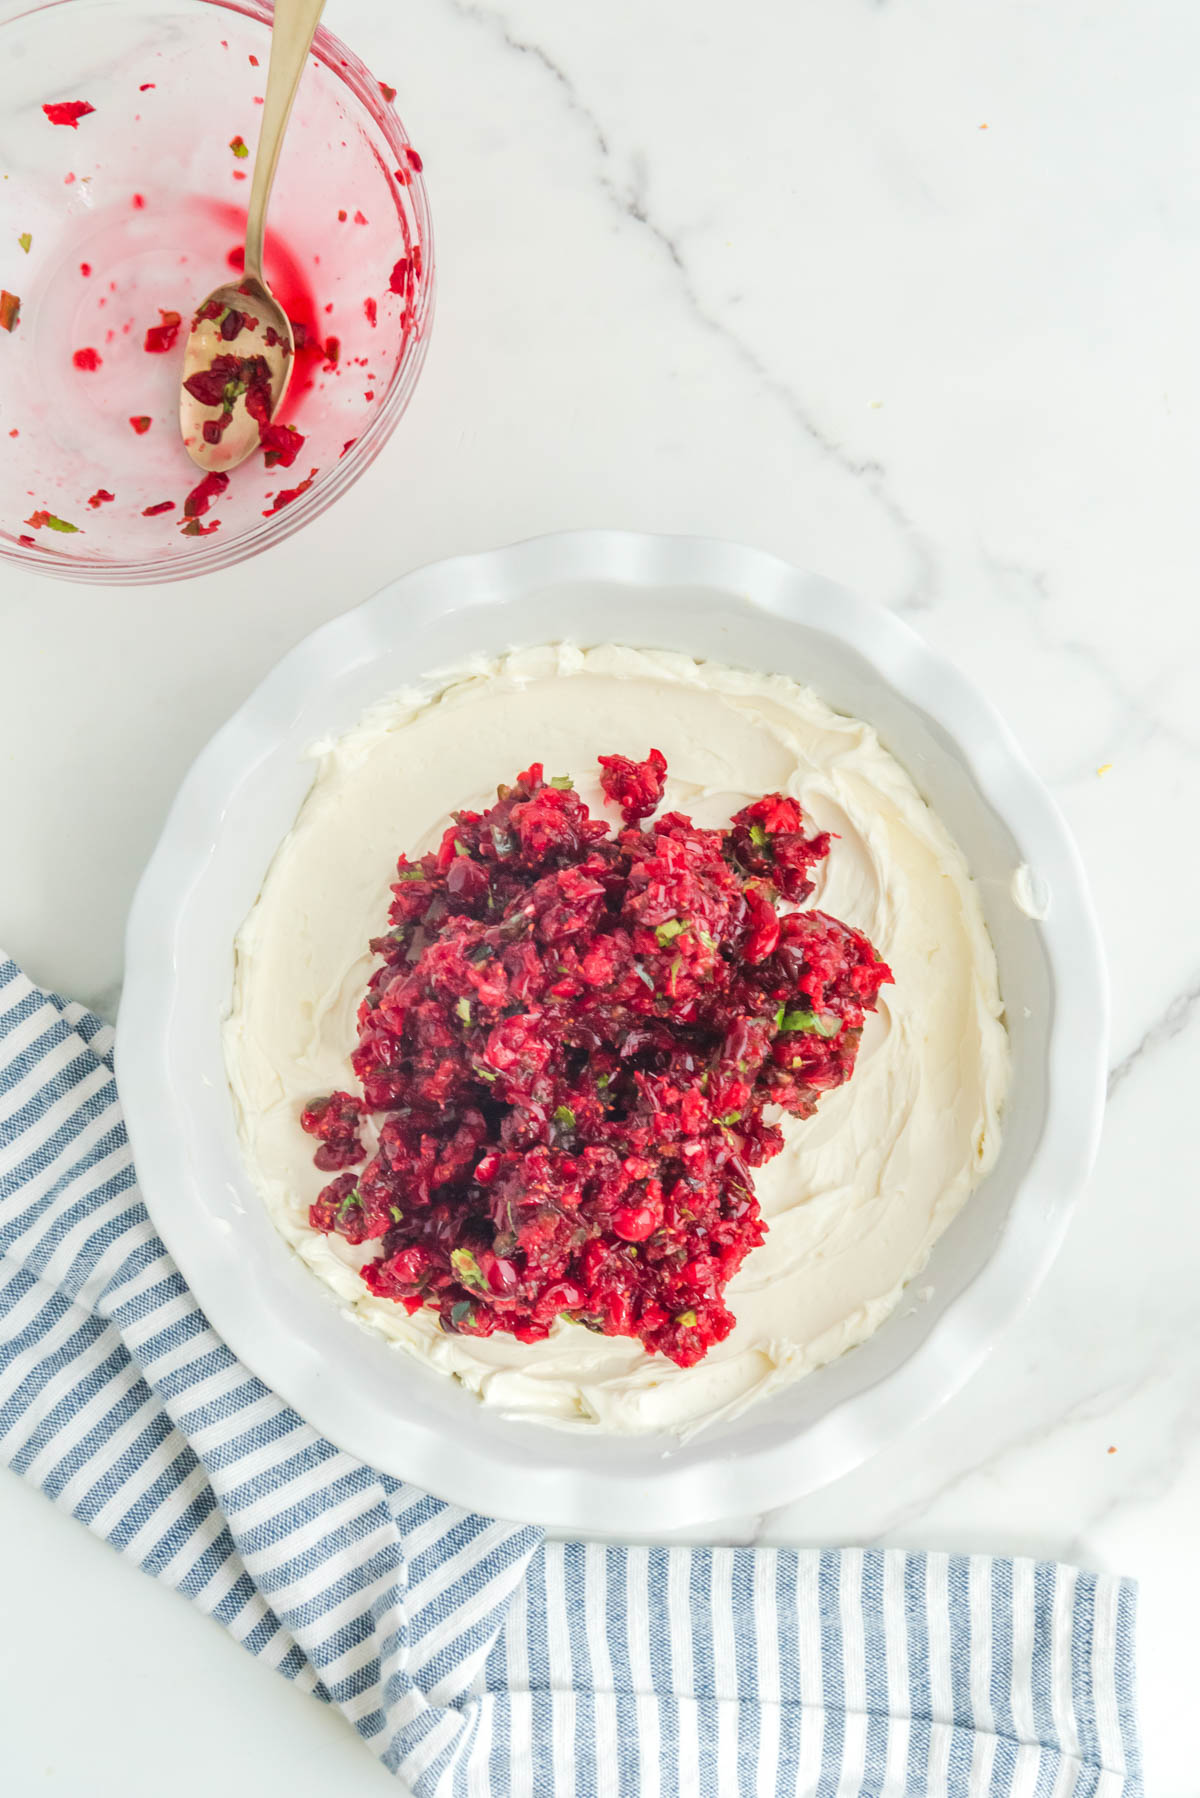 Cranberry mixture poured over cream cheese